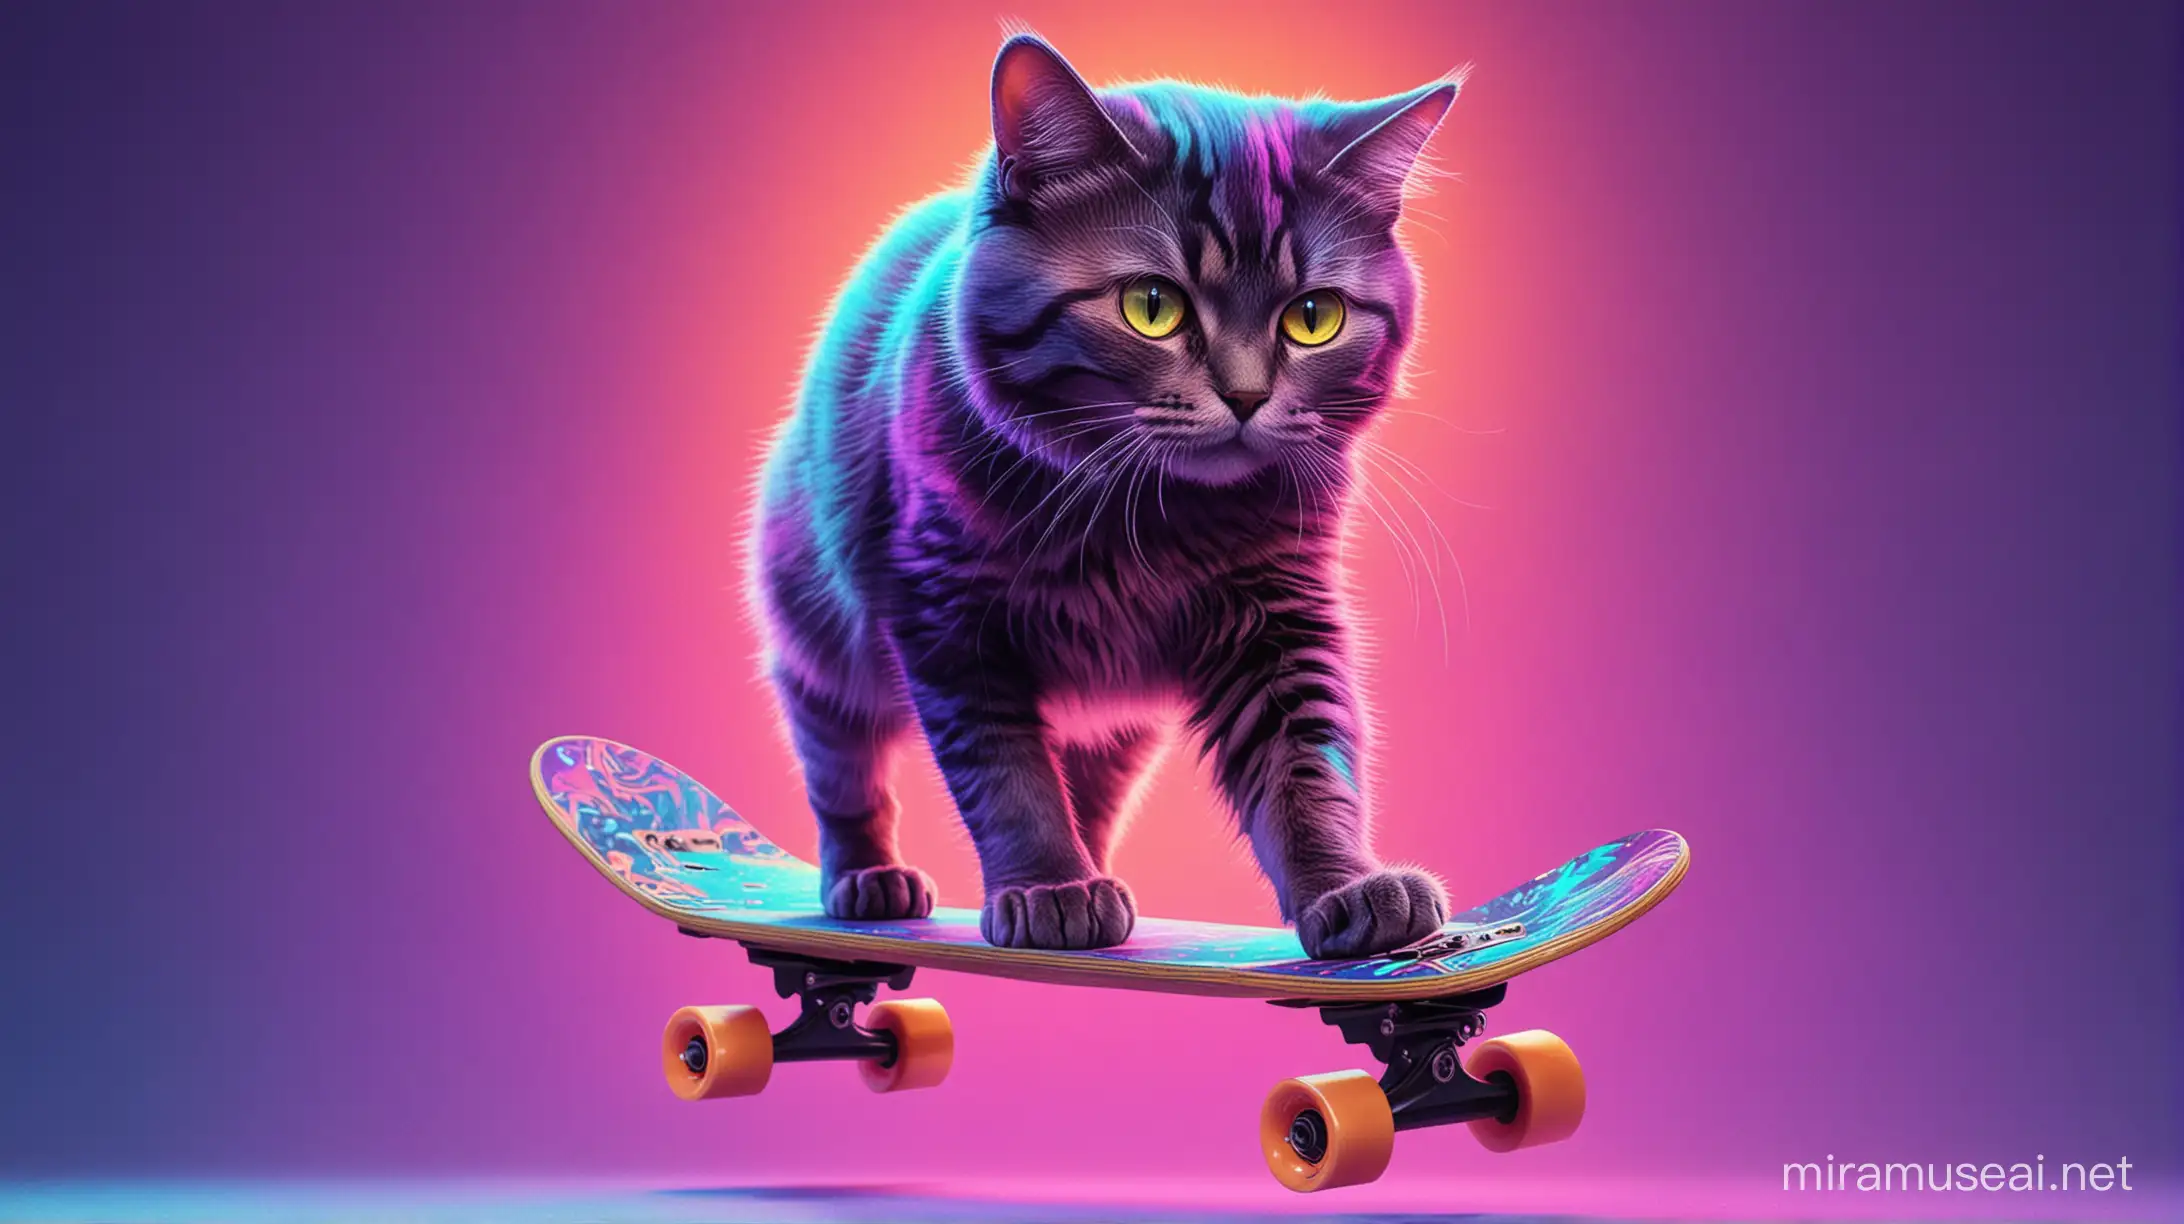 A psychedelic cat riding a skateboard in neon background